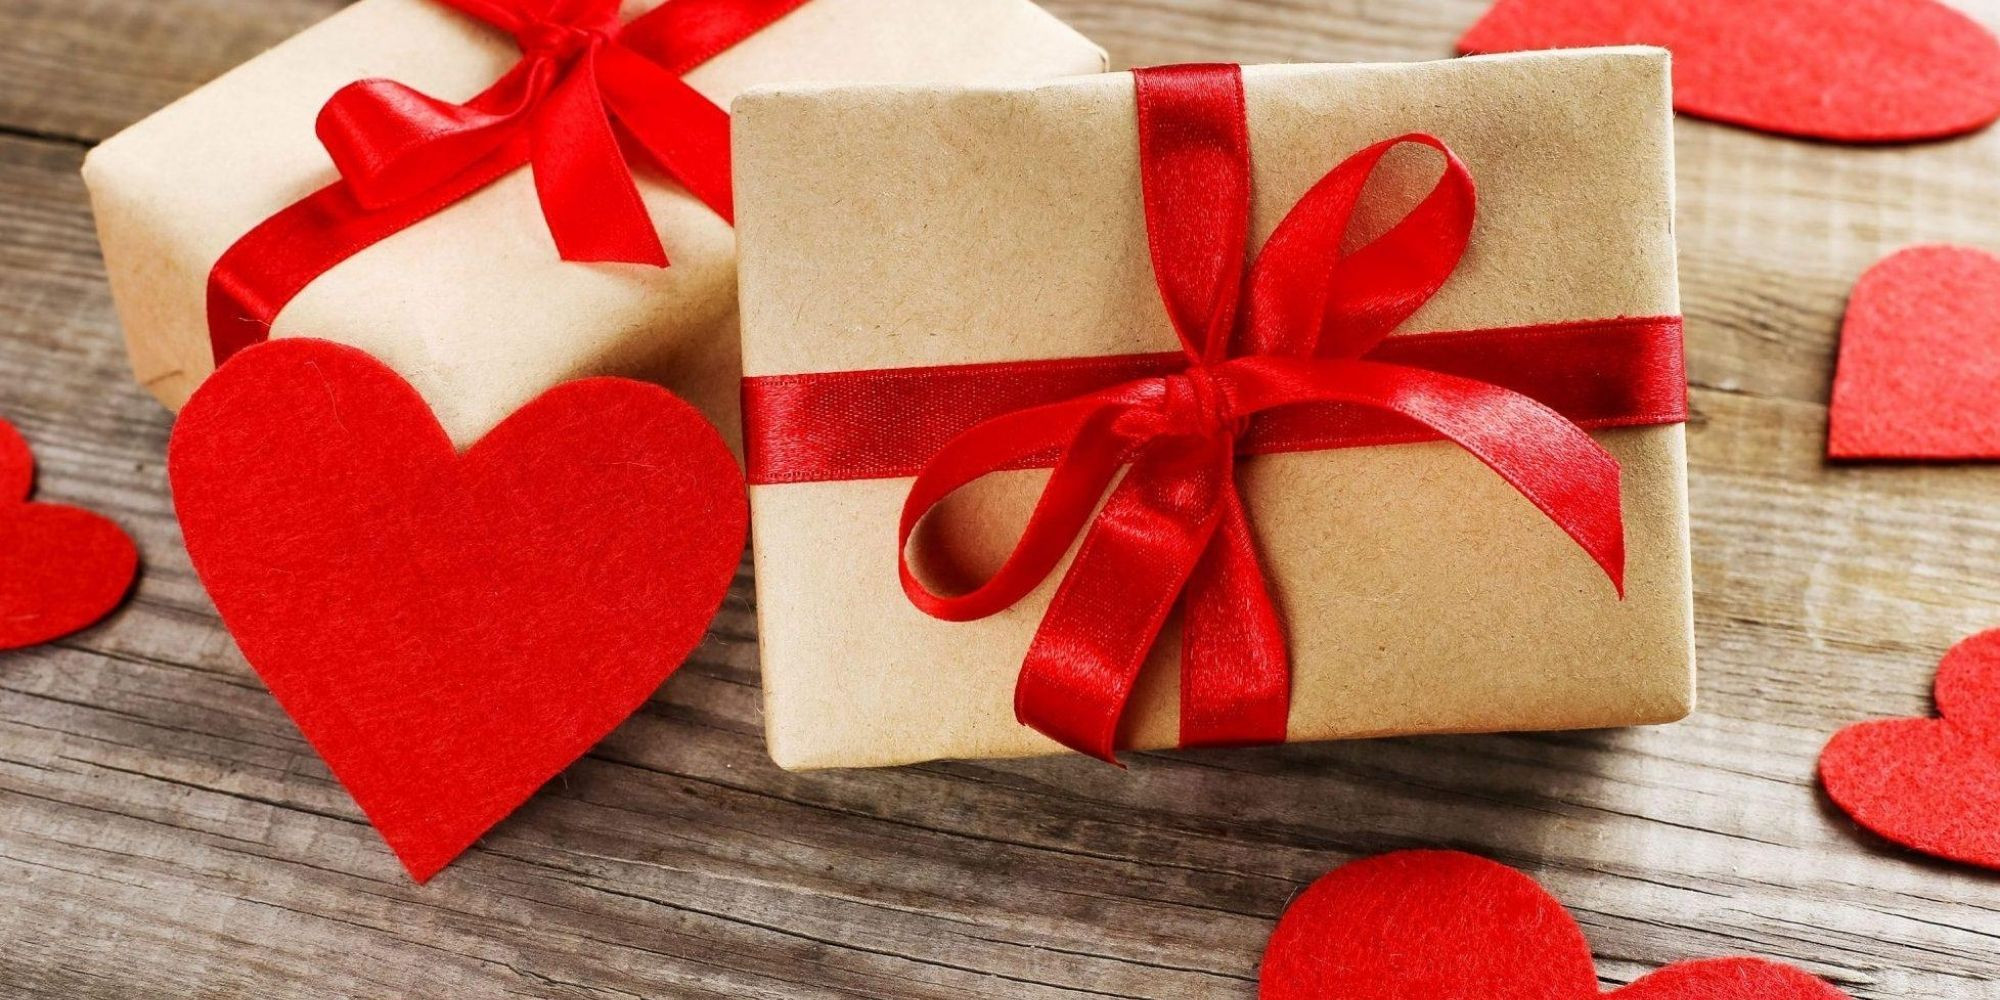 Top 10 Valentines Day Gifts For Her
 Best Valentines Gifts for Her Updated 2020